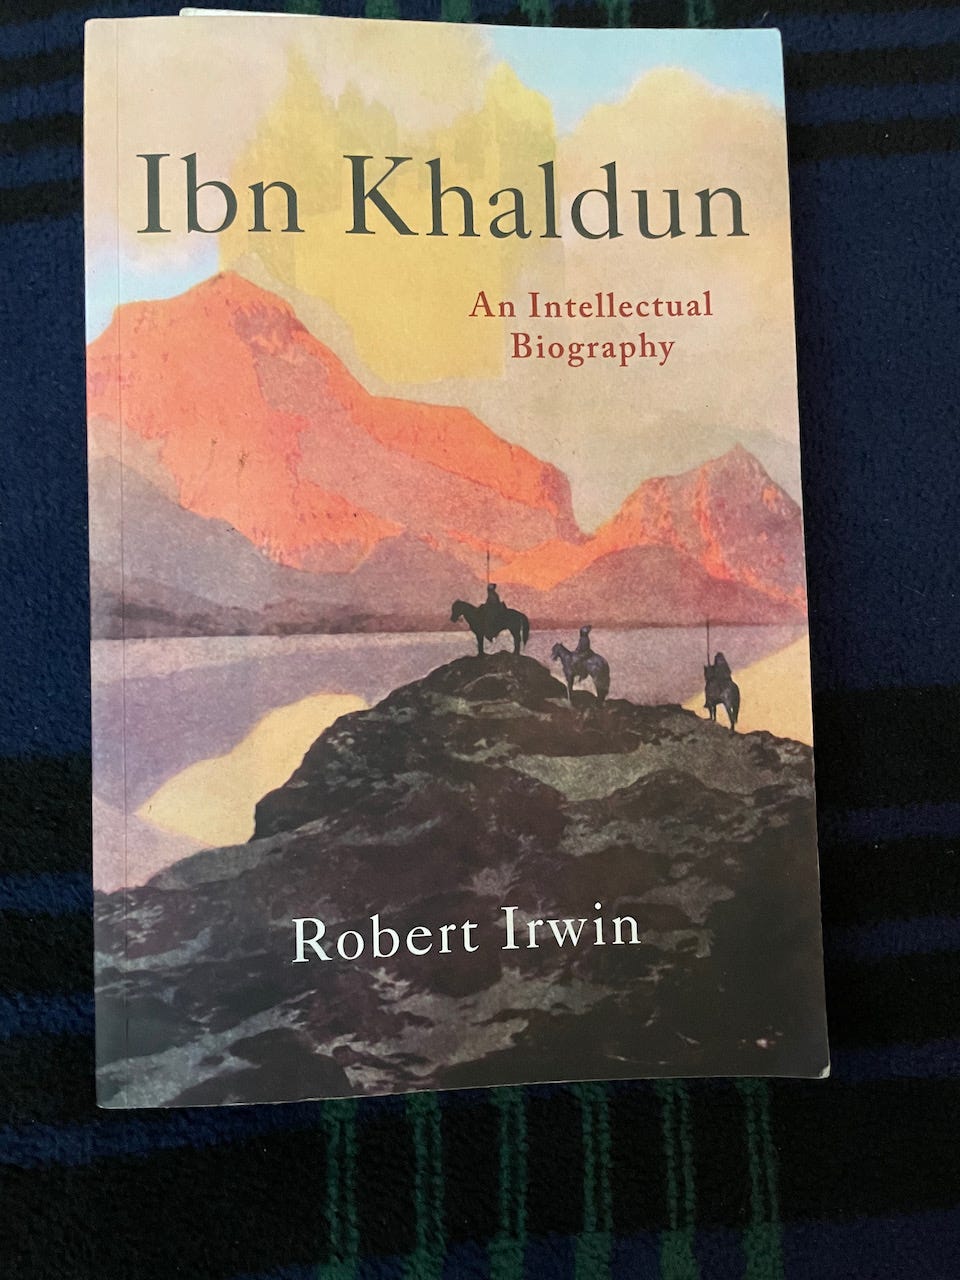 Photo of the cover of Robert Irwin's Ibn Khldun, a biography